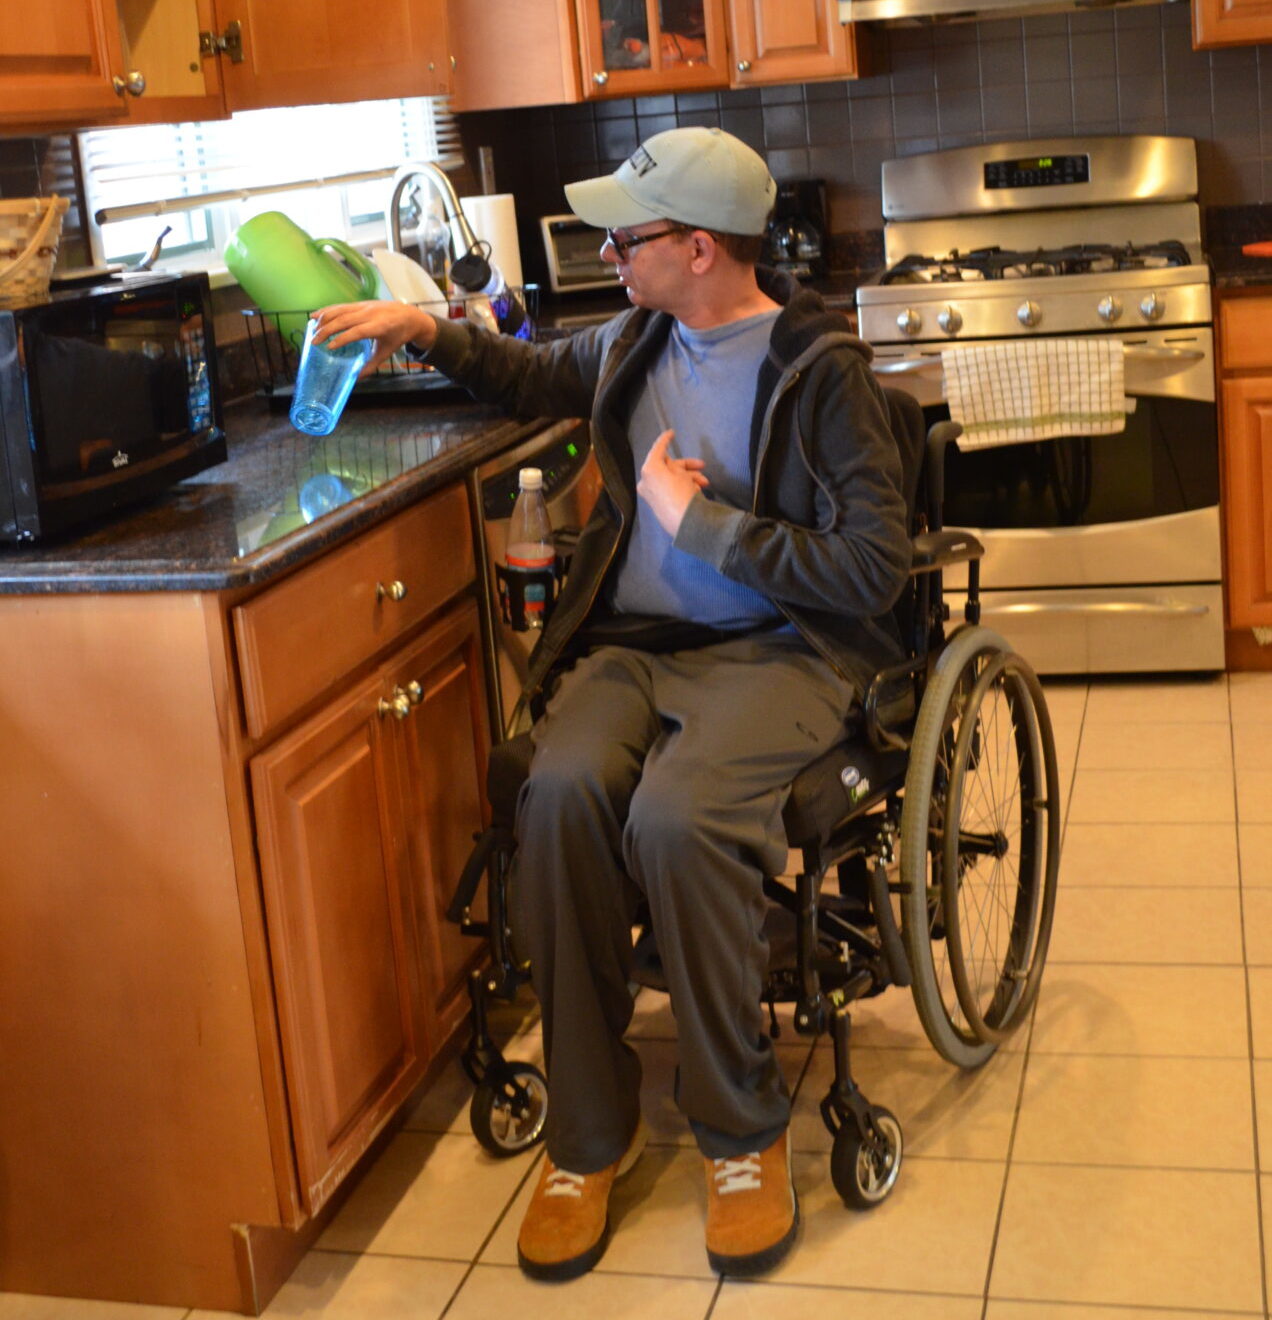 Bancroft NeuroRehab patient in a wheelchair is in his kitchen holding a blue cup.